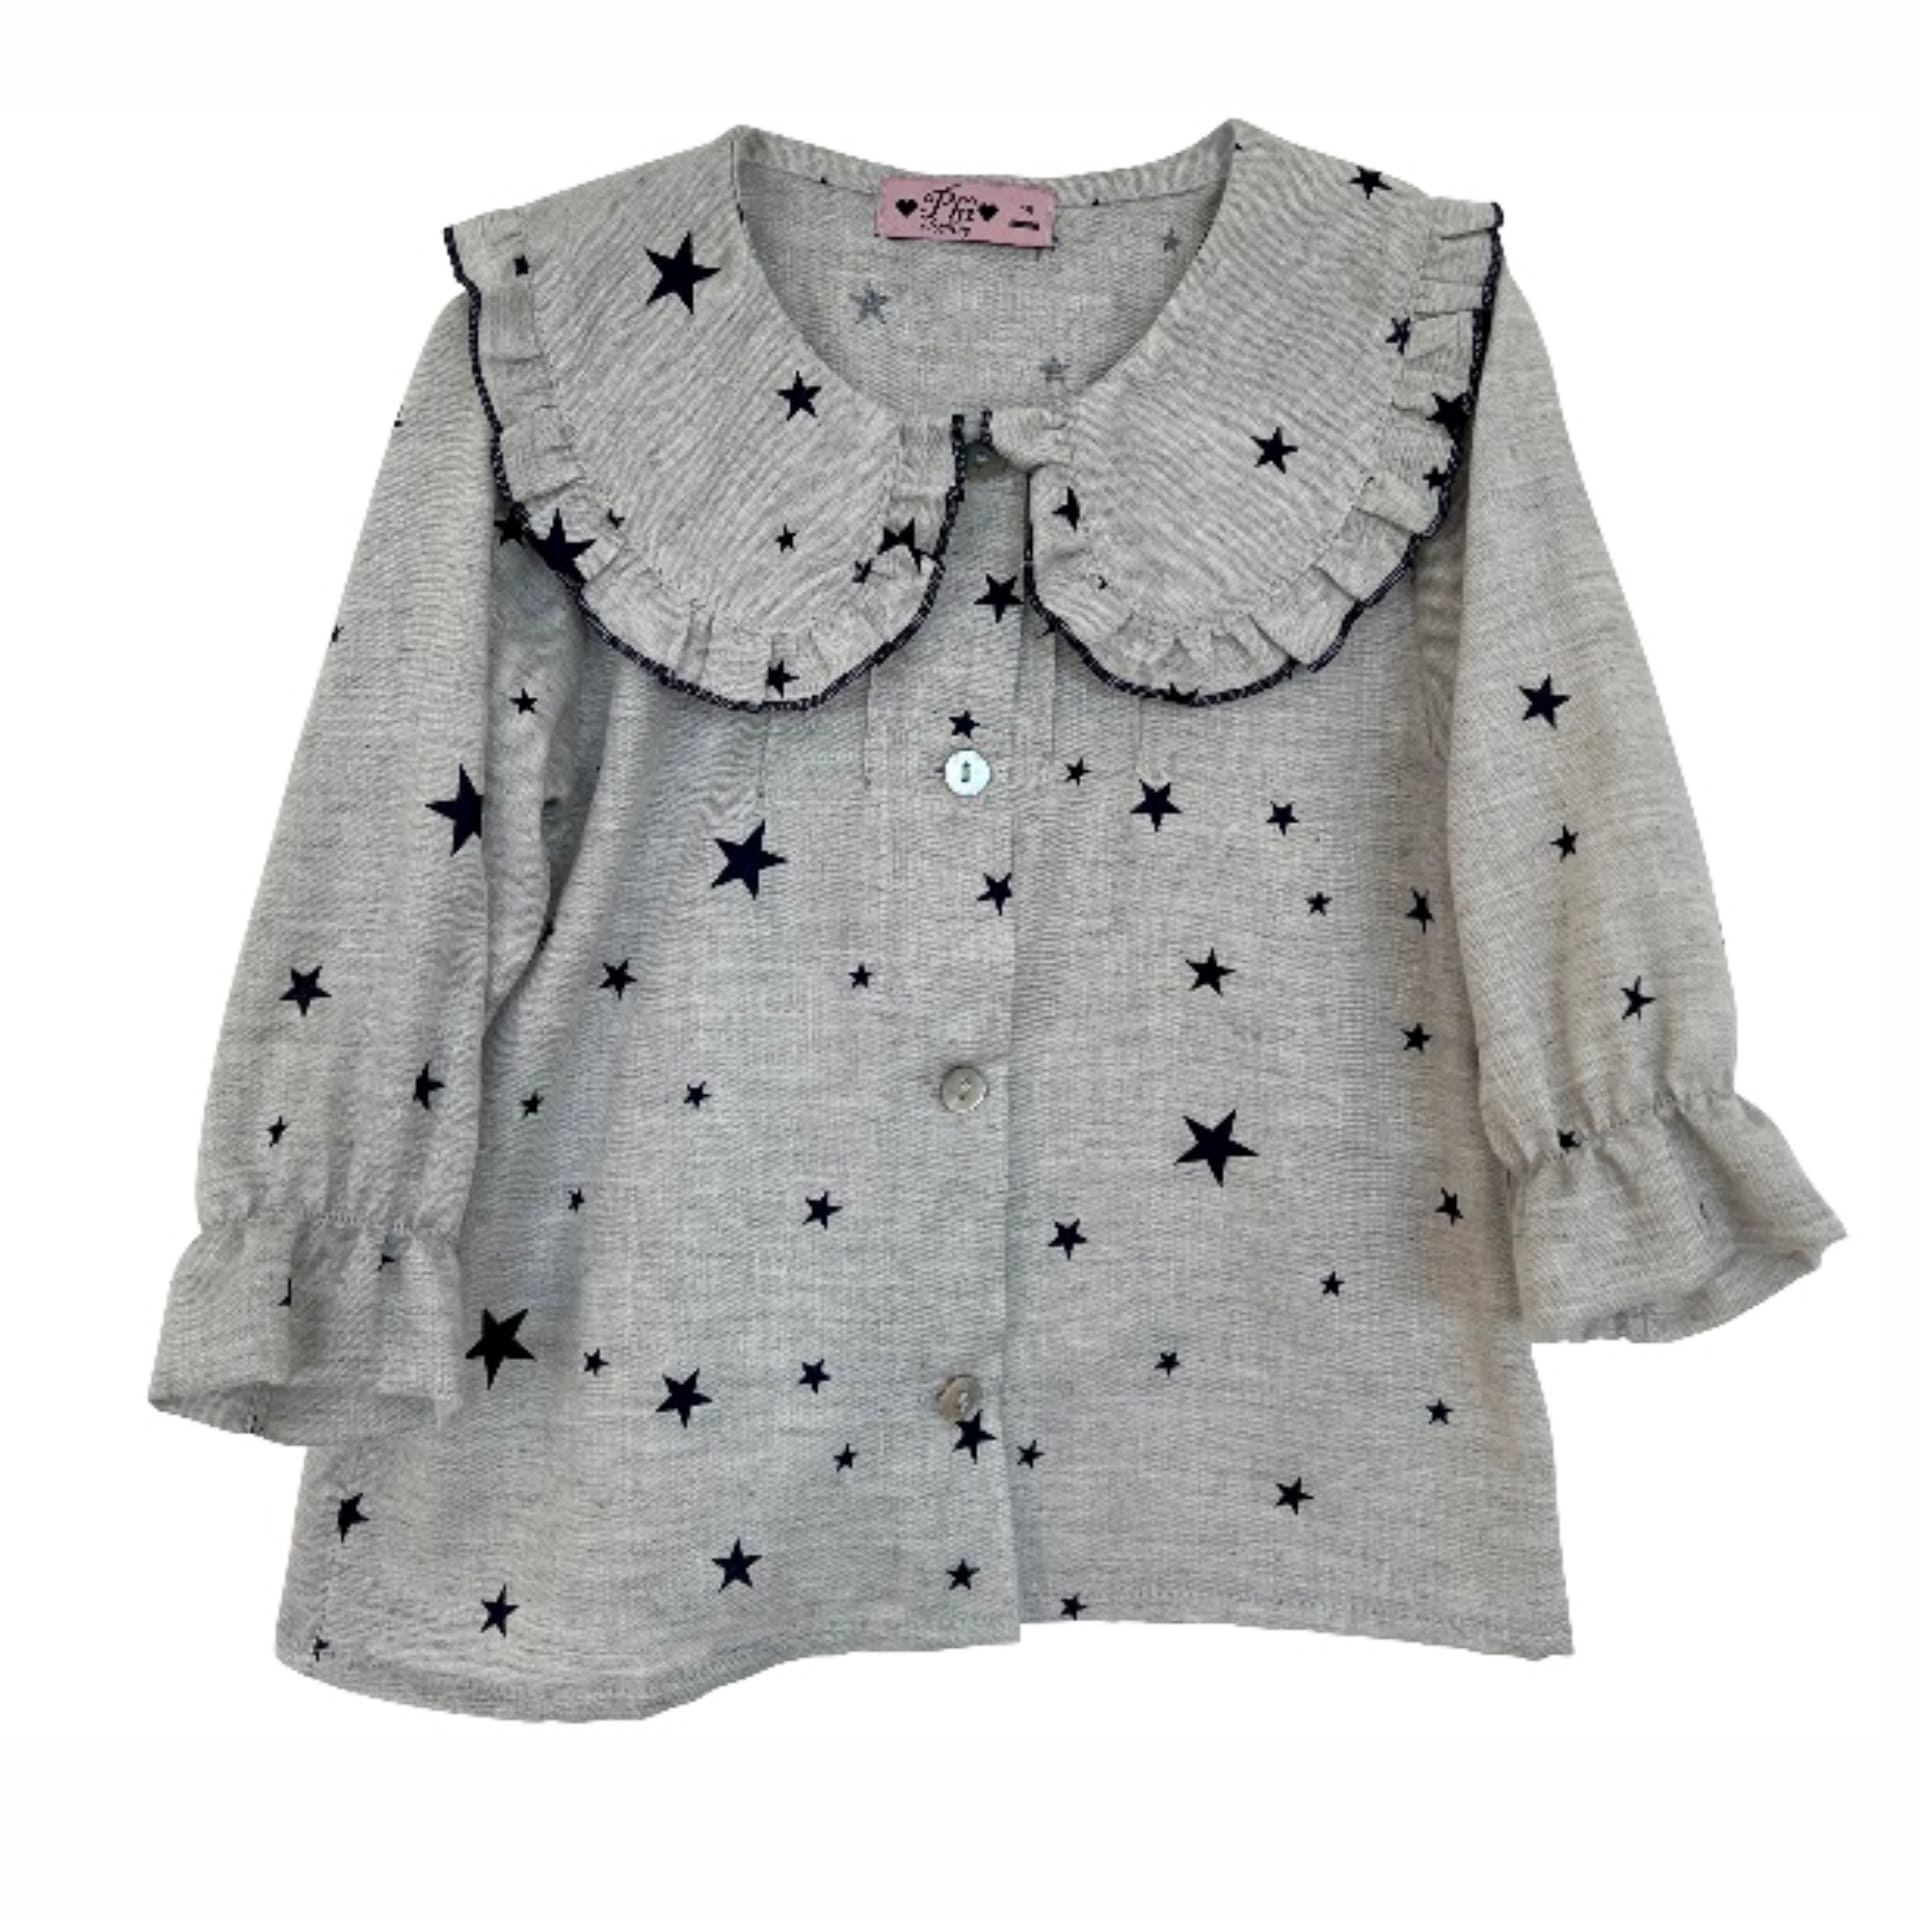 Grey with navy stars 2 collar blouse